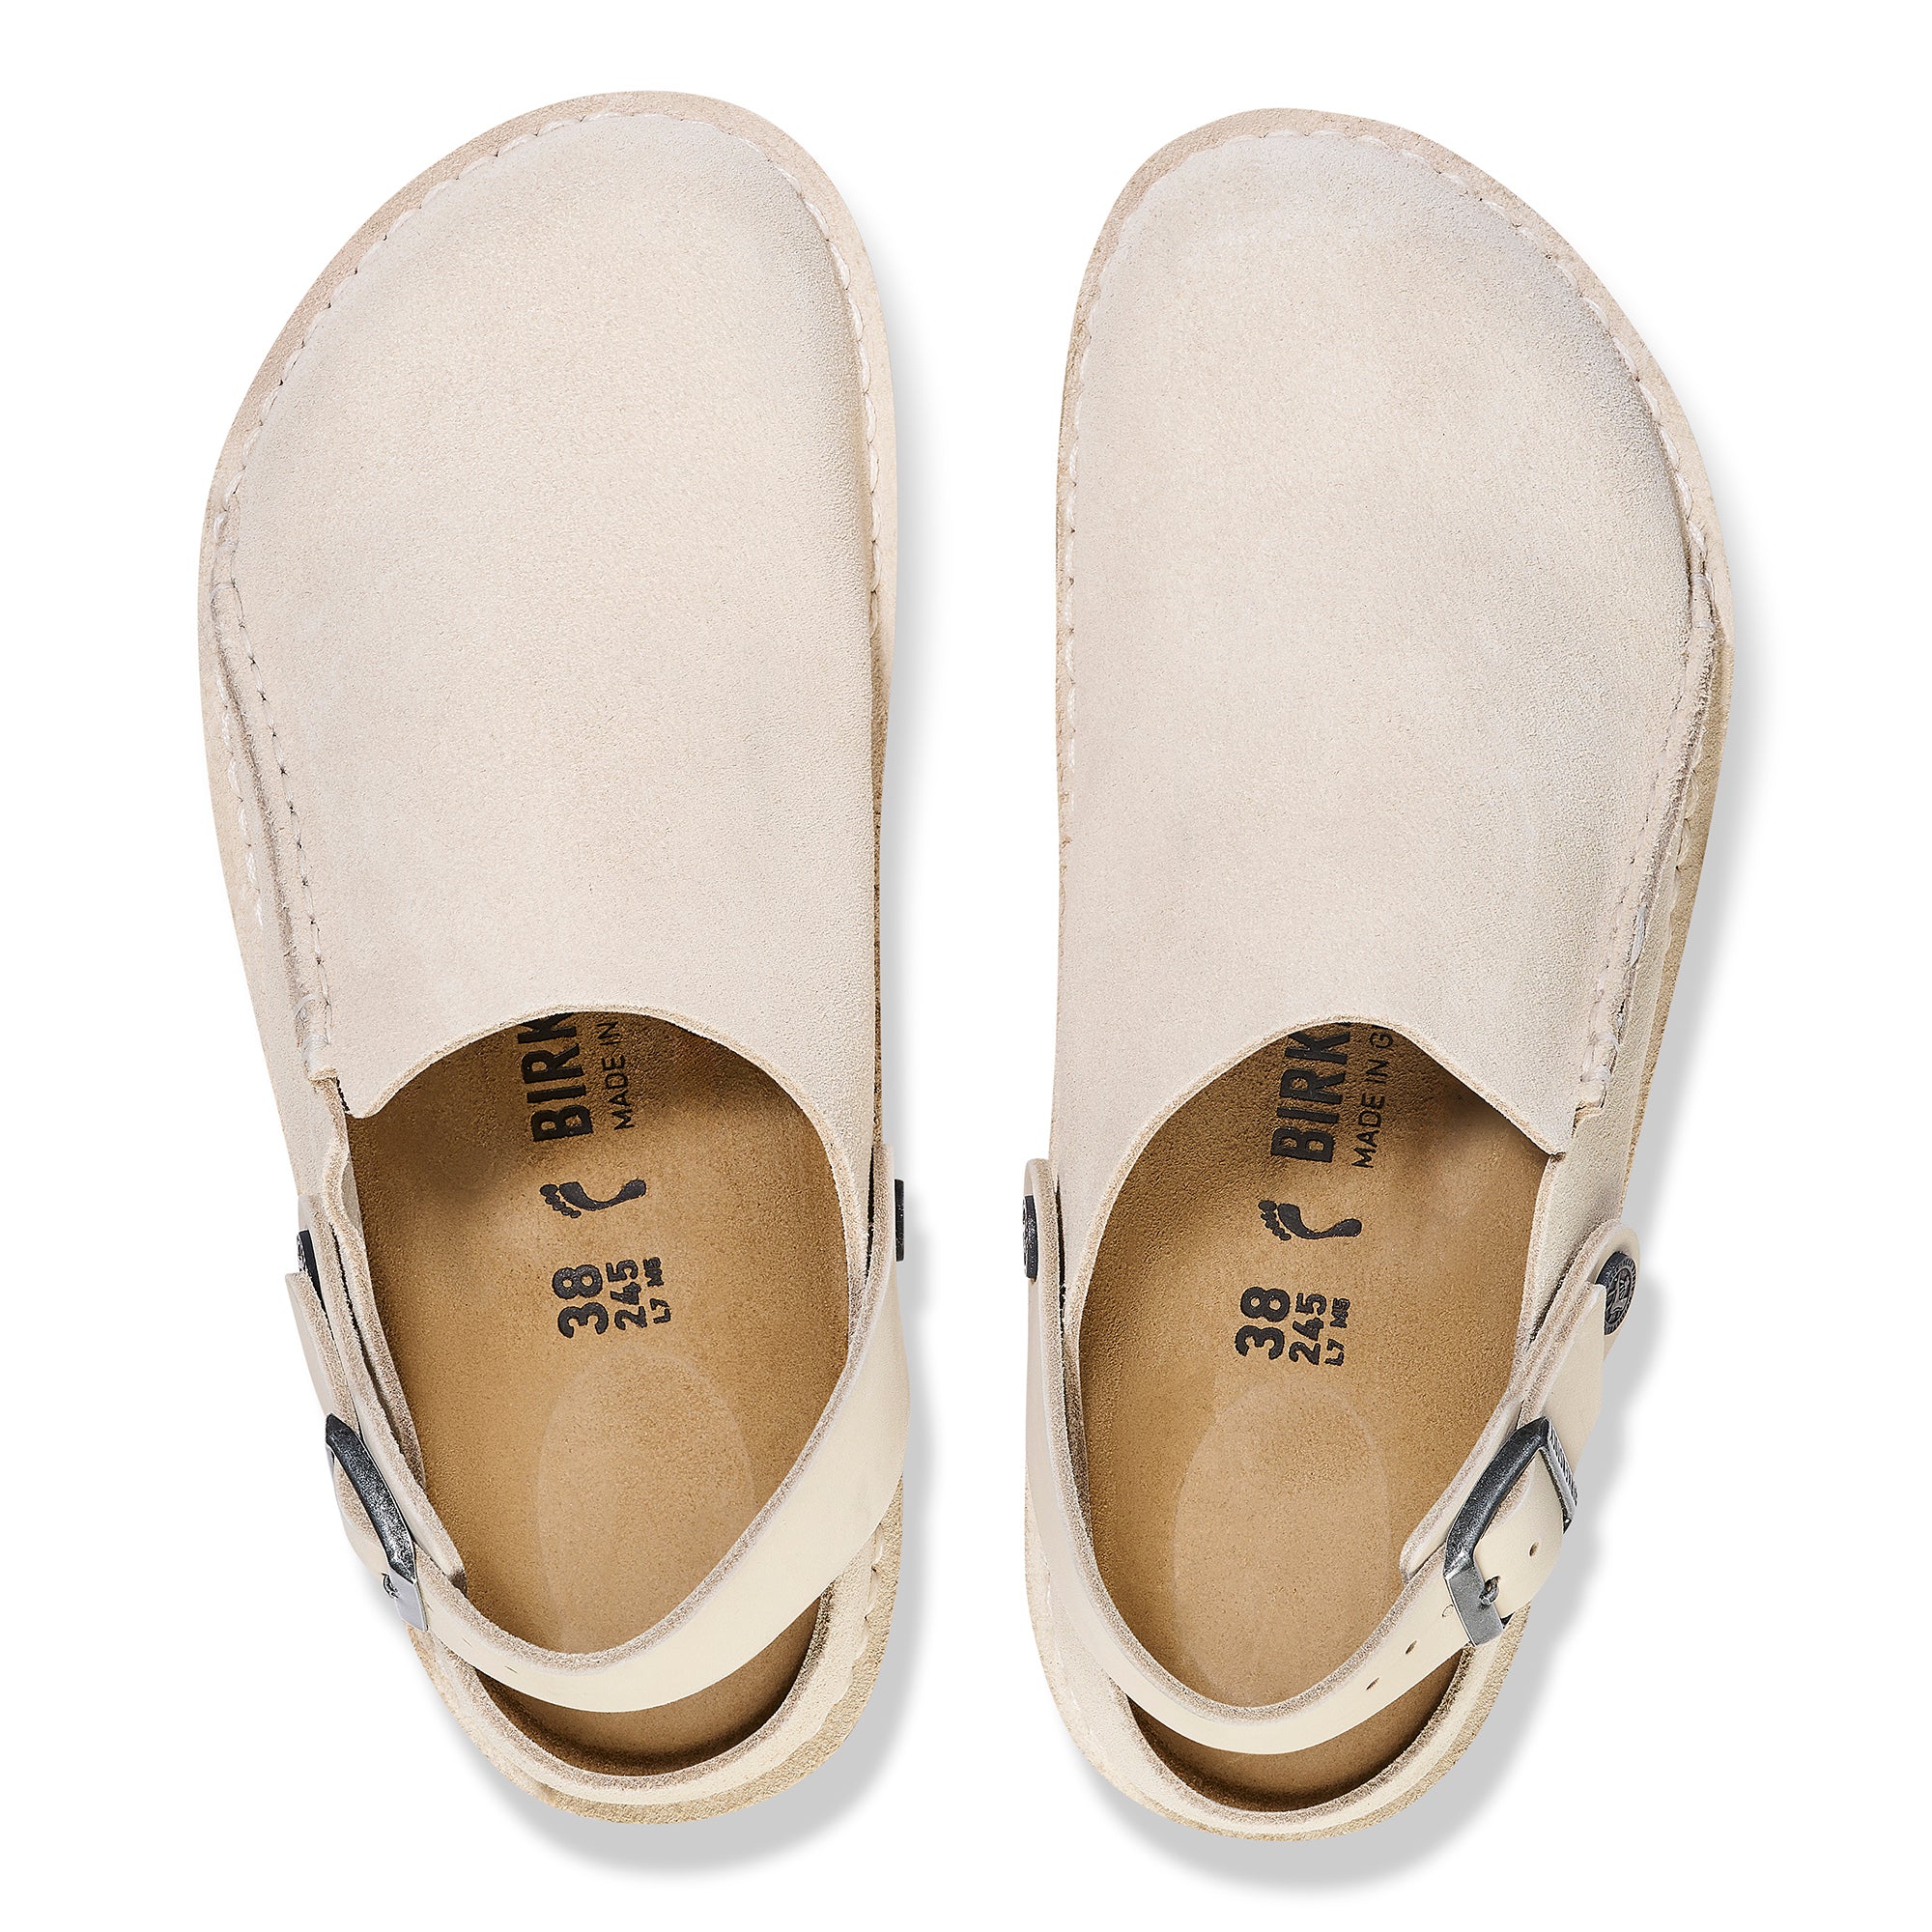 Birkenstock Limited Edition Lutry eggshell suede